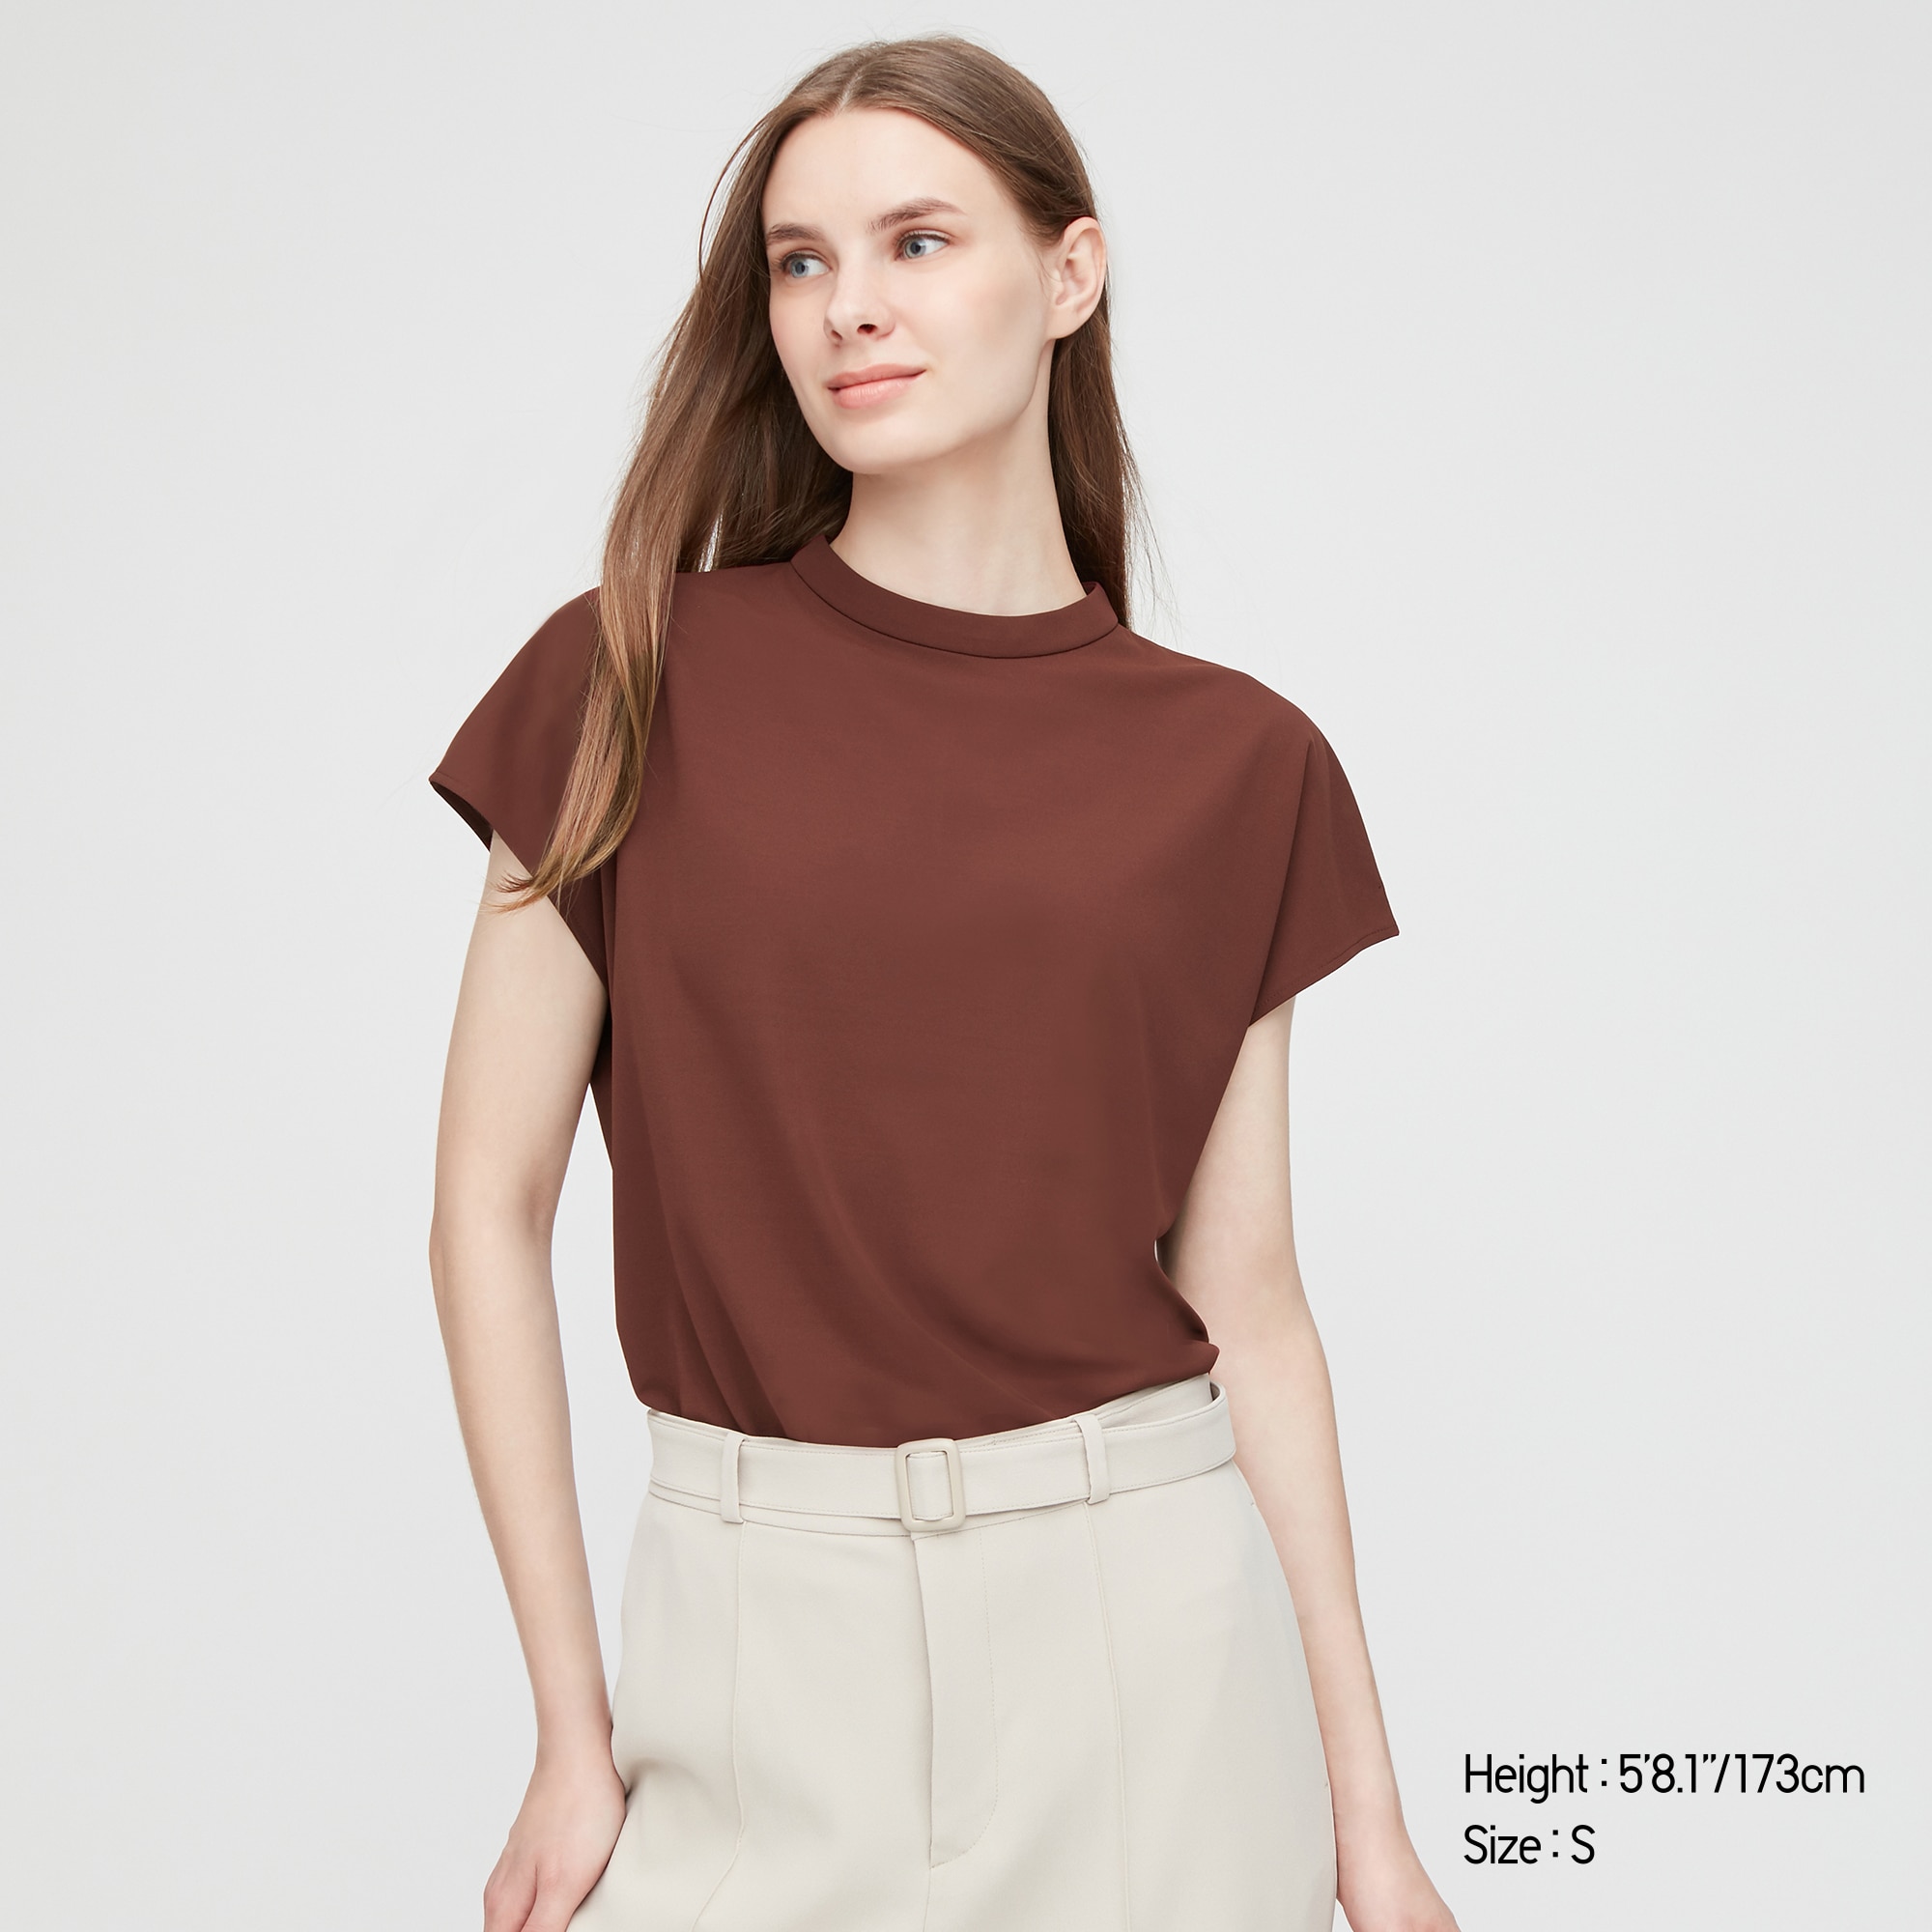 Uniqlo CREPE JERSEY STAND COLLAR SHORT-SLEEVE T-SHIRT